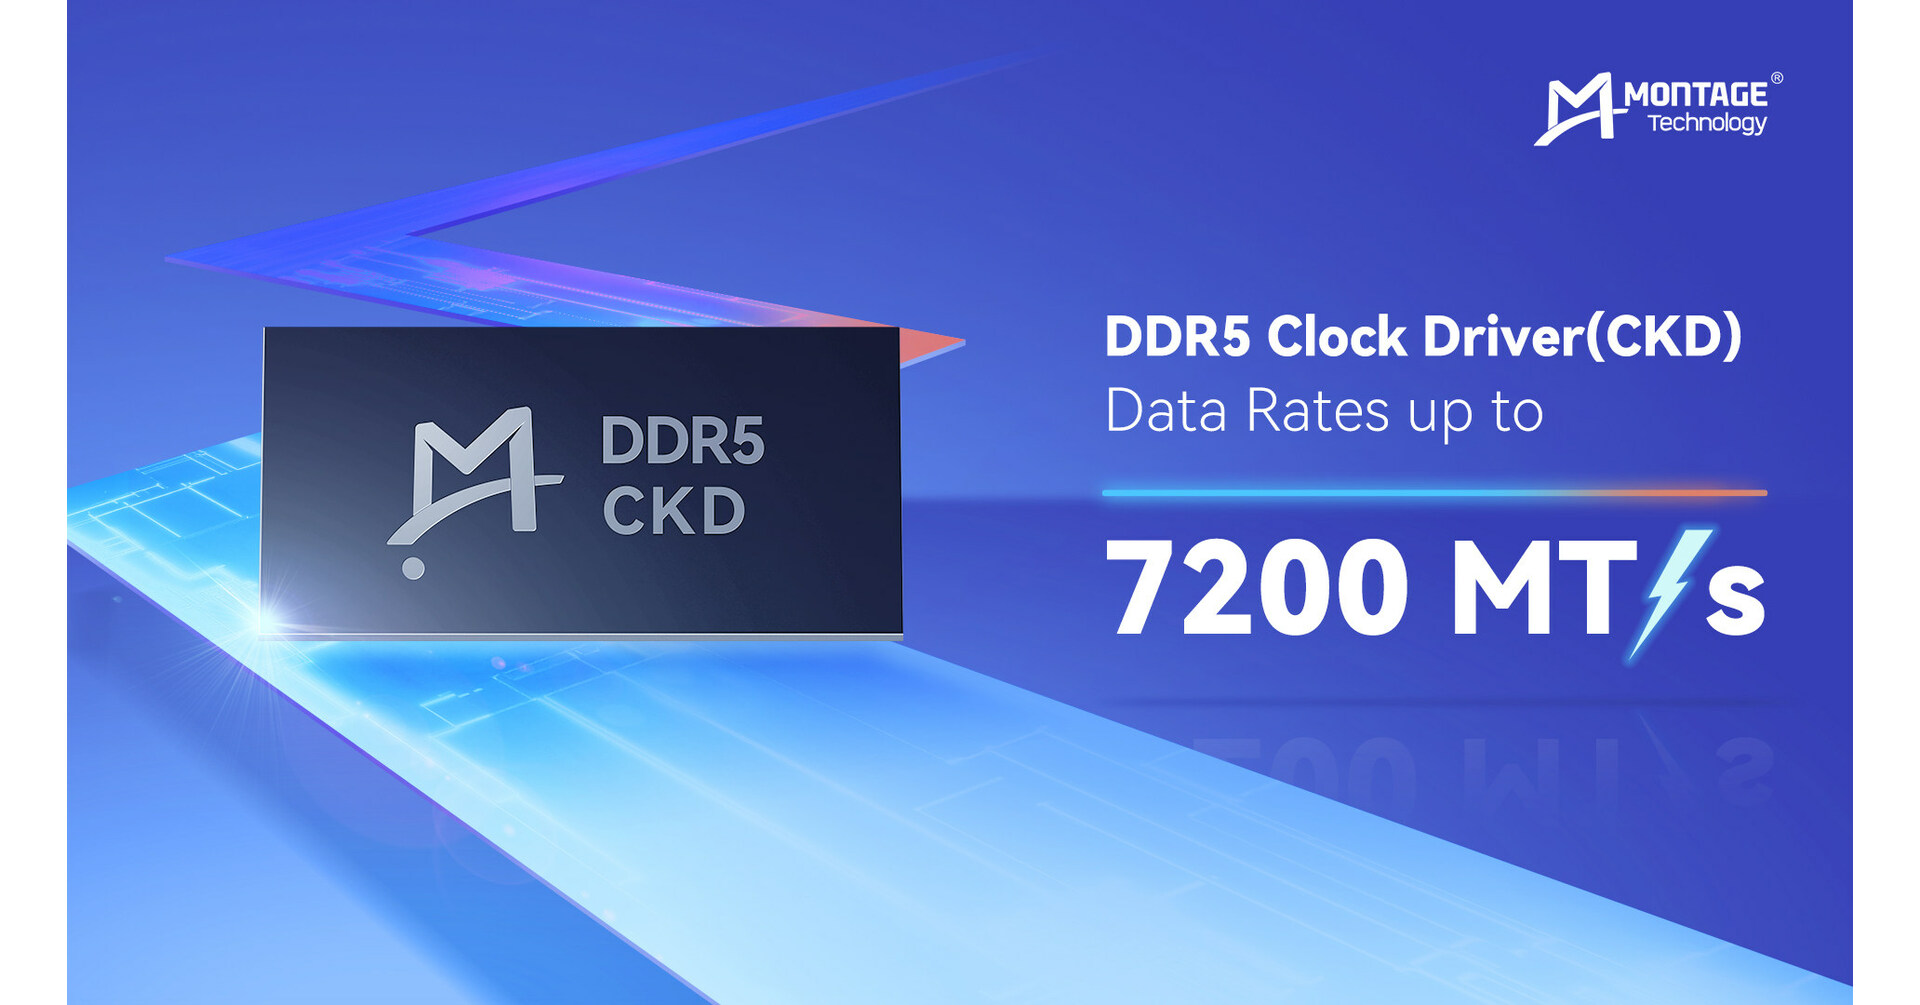 Montage Technology Leads the Way in Trial Production of DDR5 CKDs